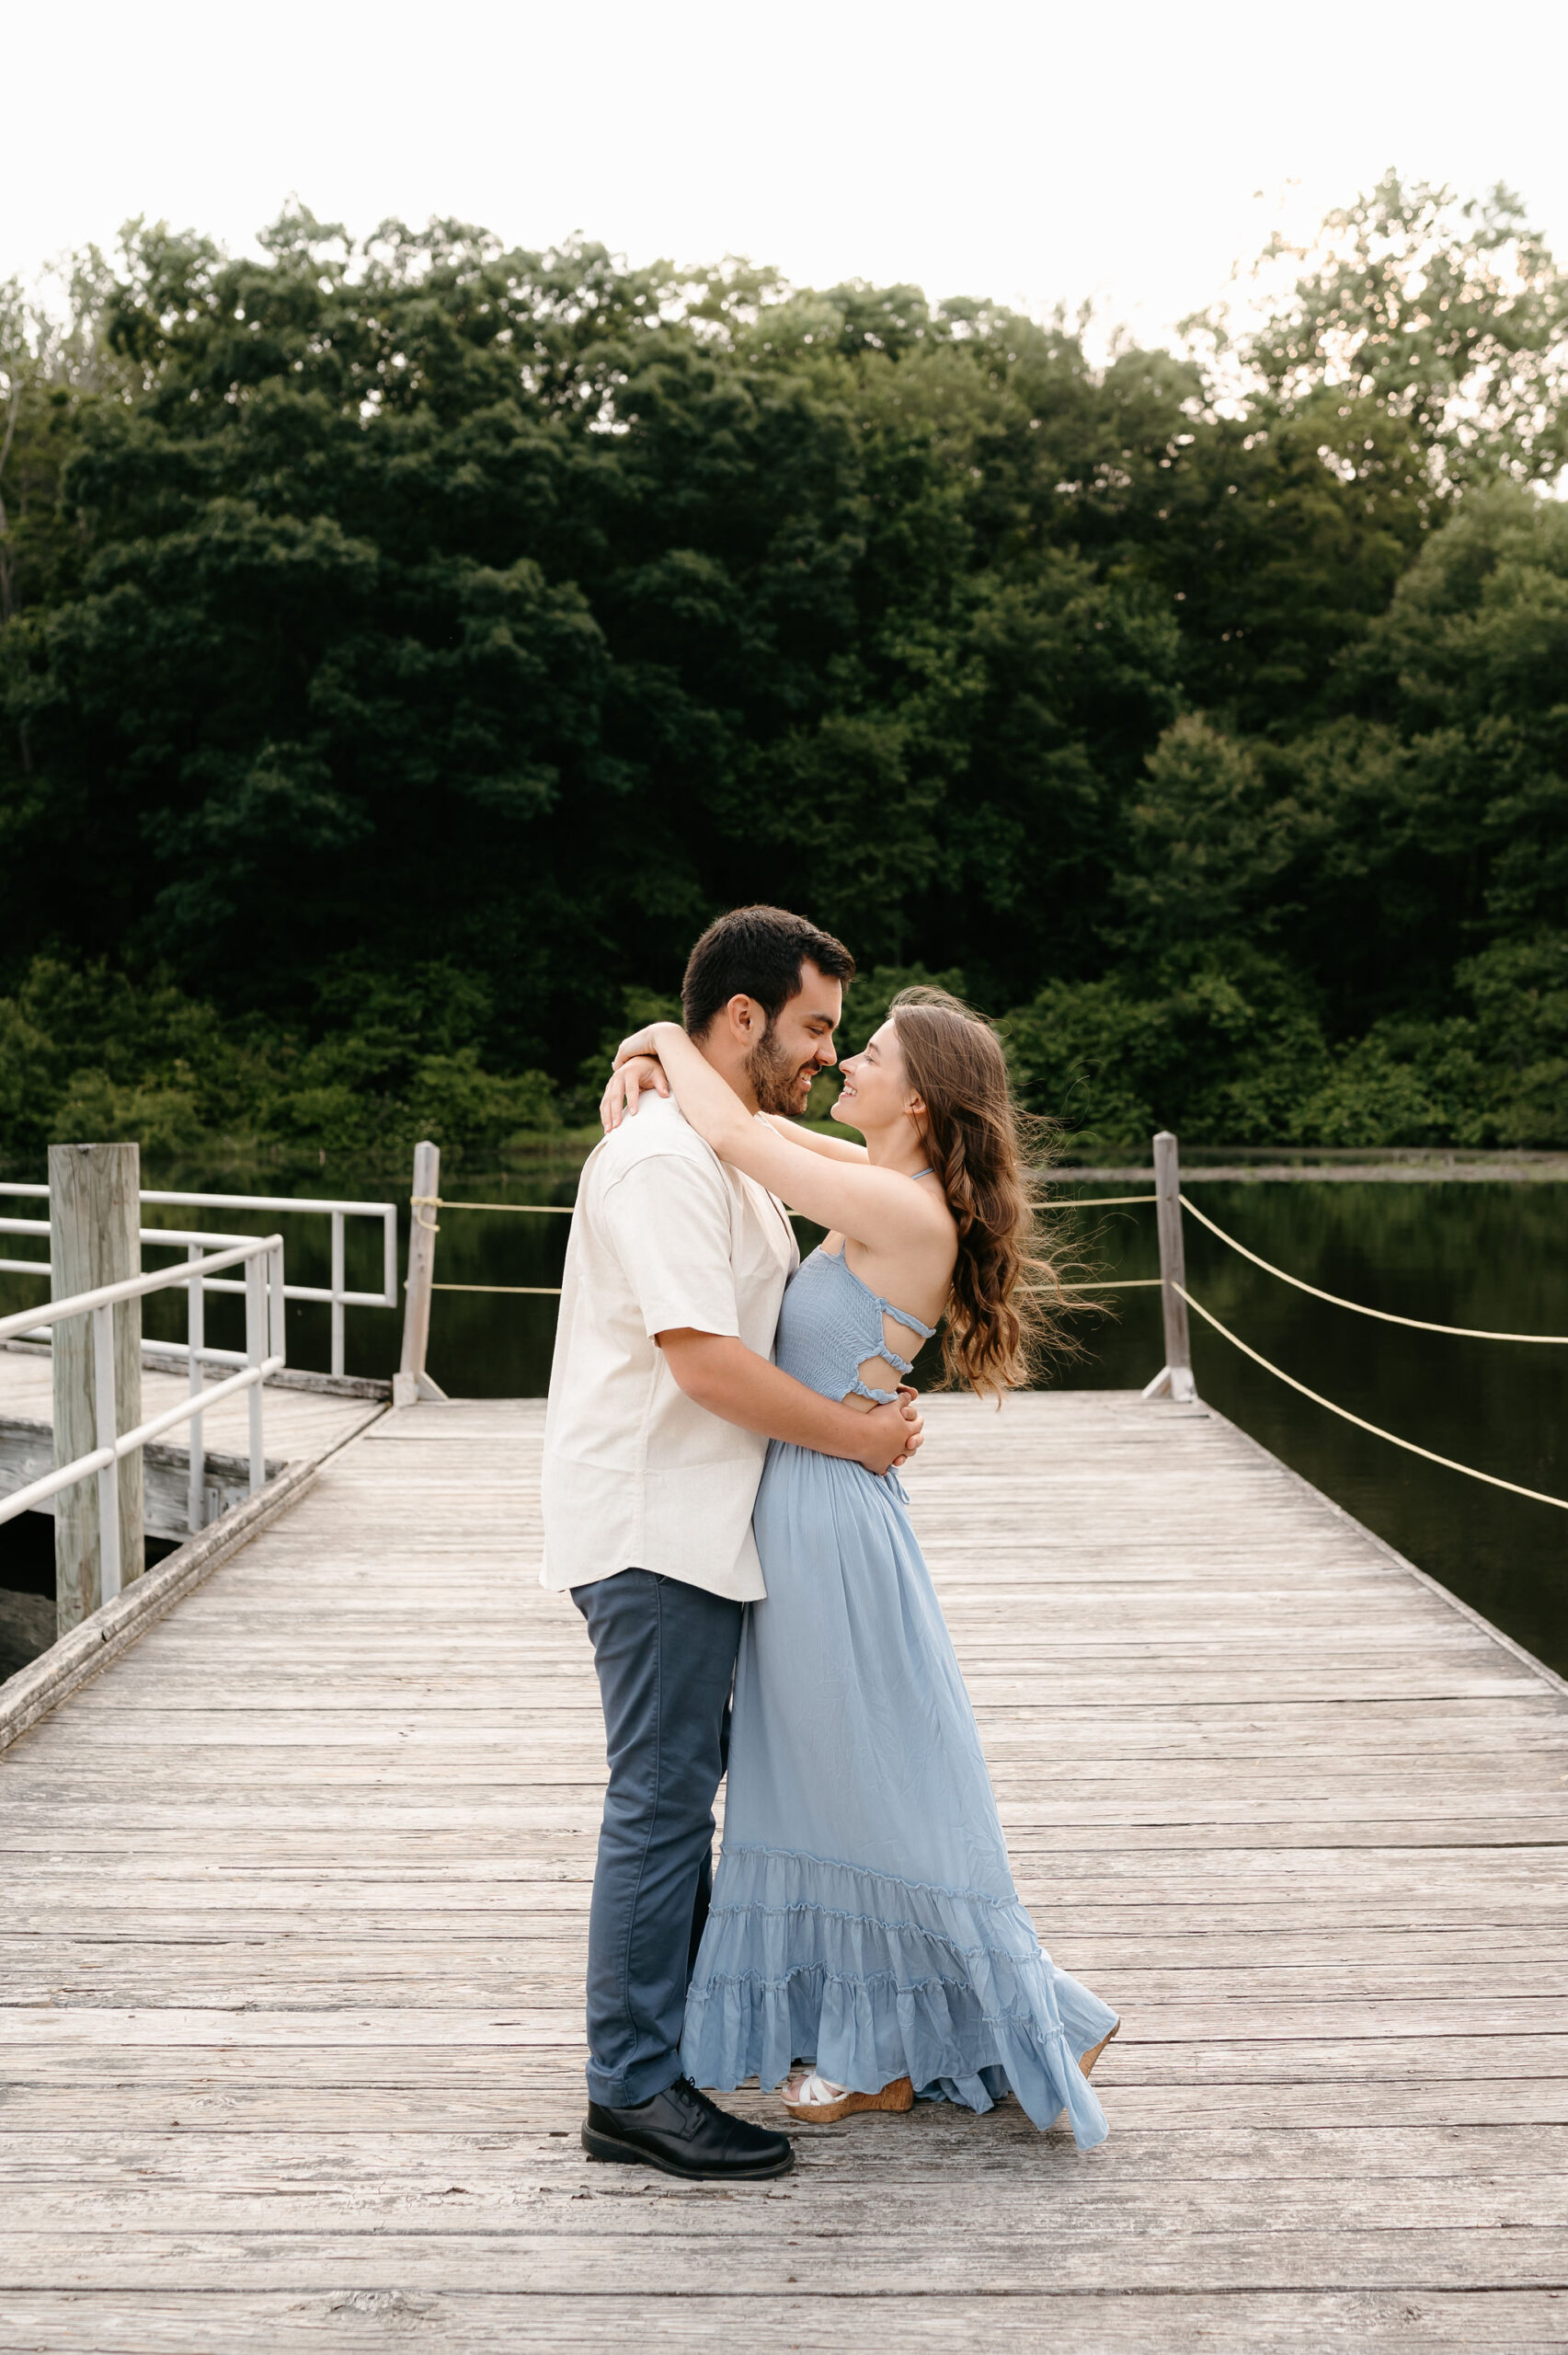 Round Valley Reservoir engagement session by Lisa Blanche Photography